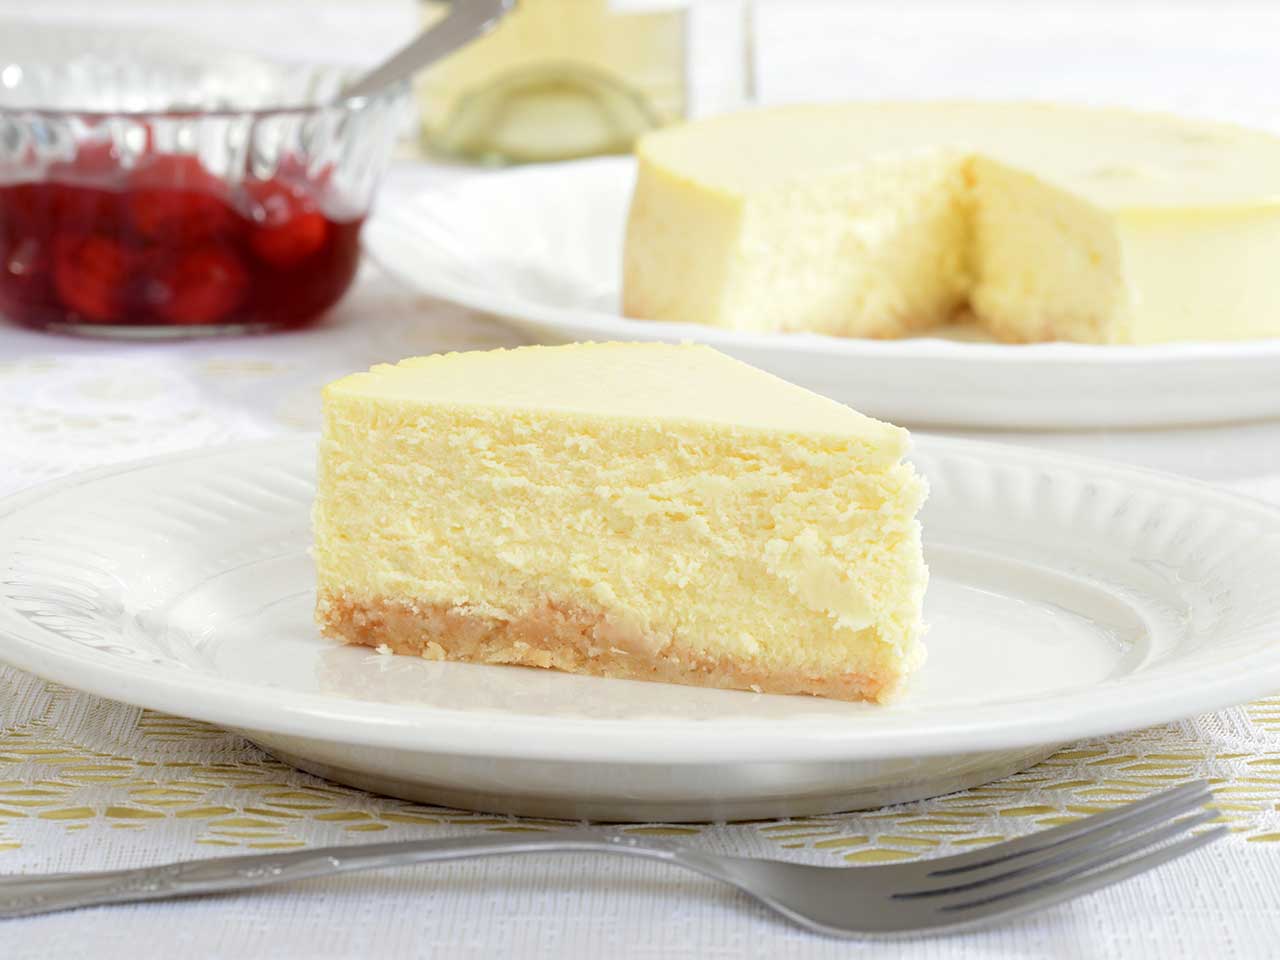 A slice of New York style cheesecake